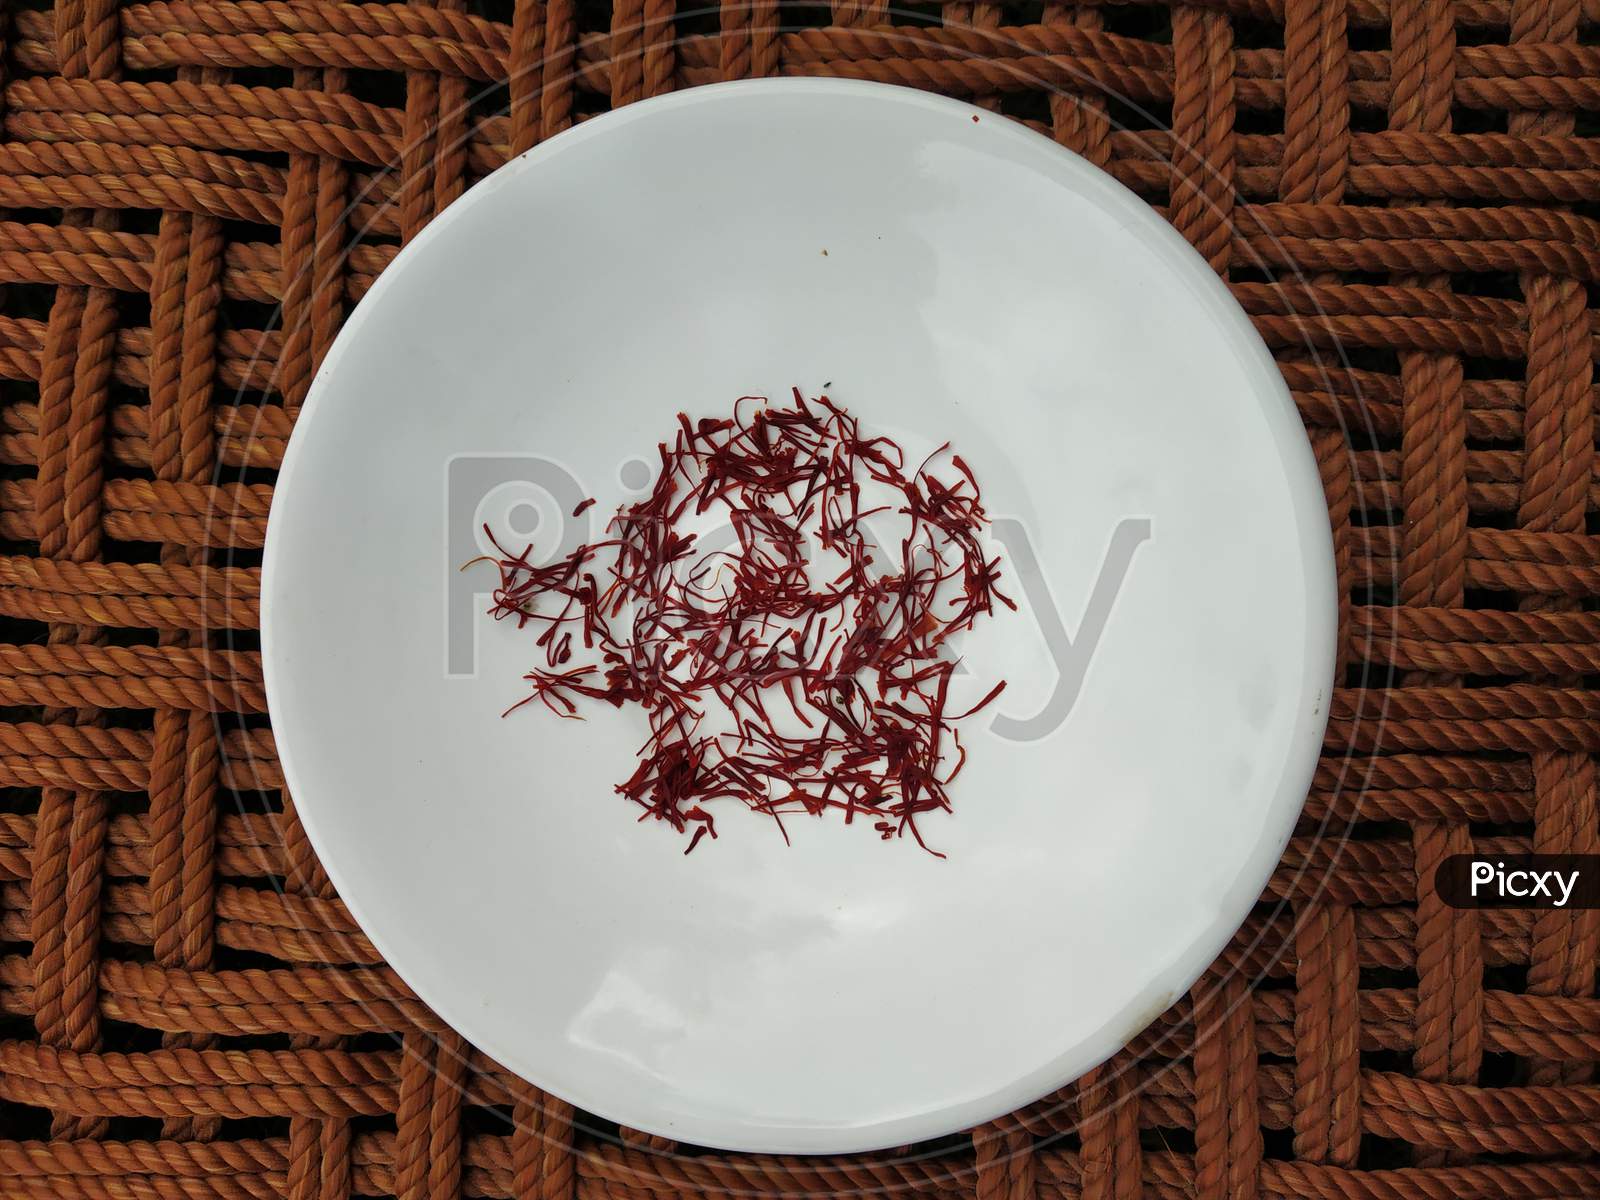 Saffron is decorated in a white plate.